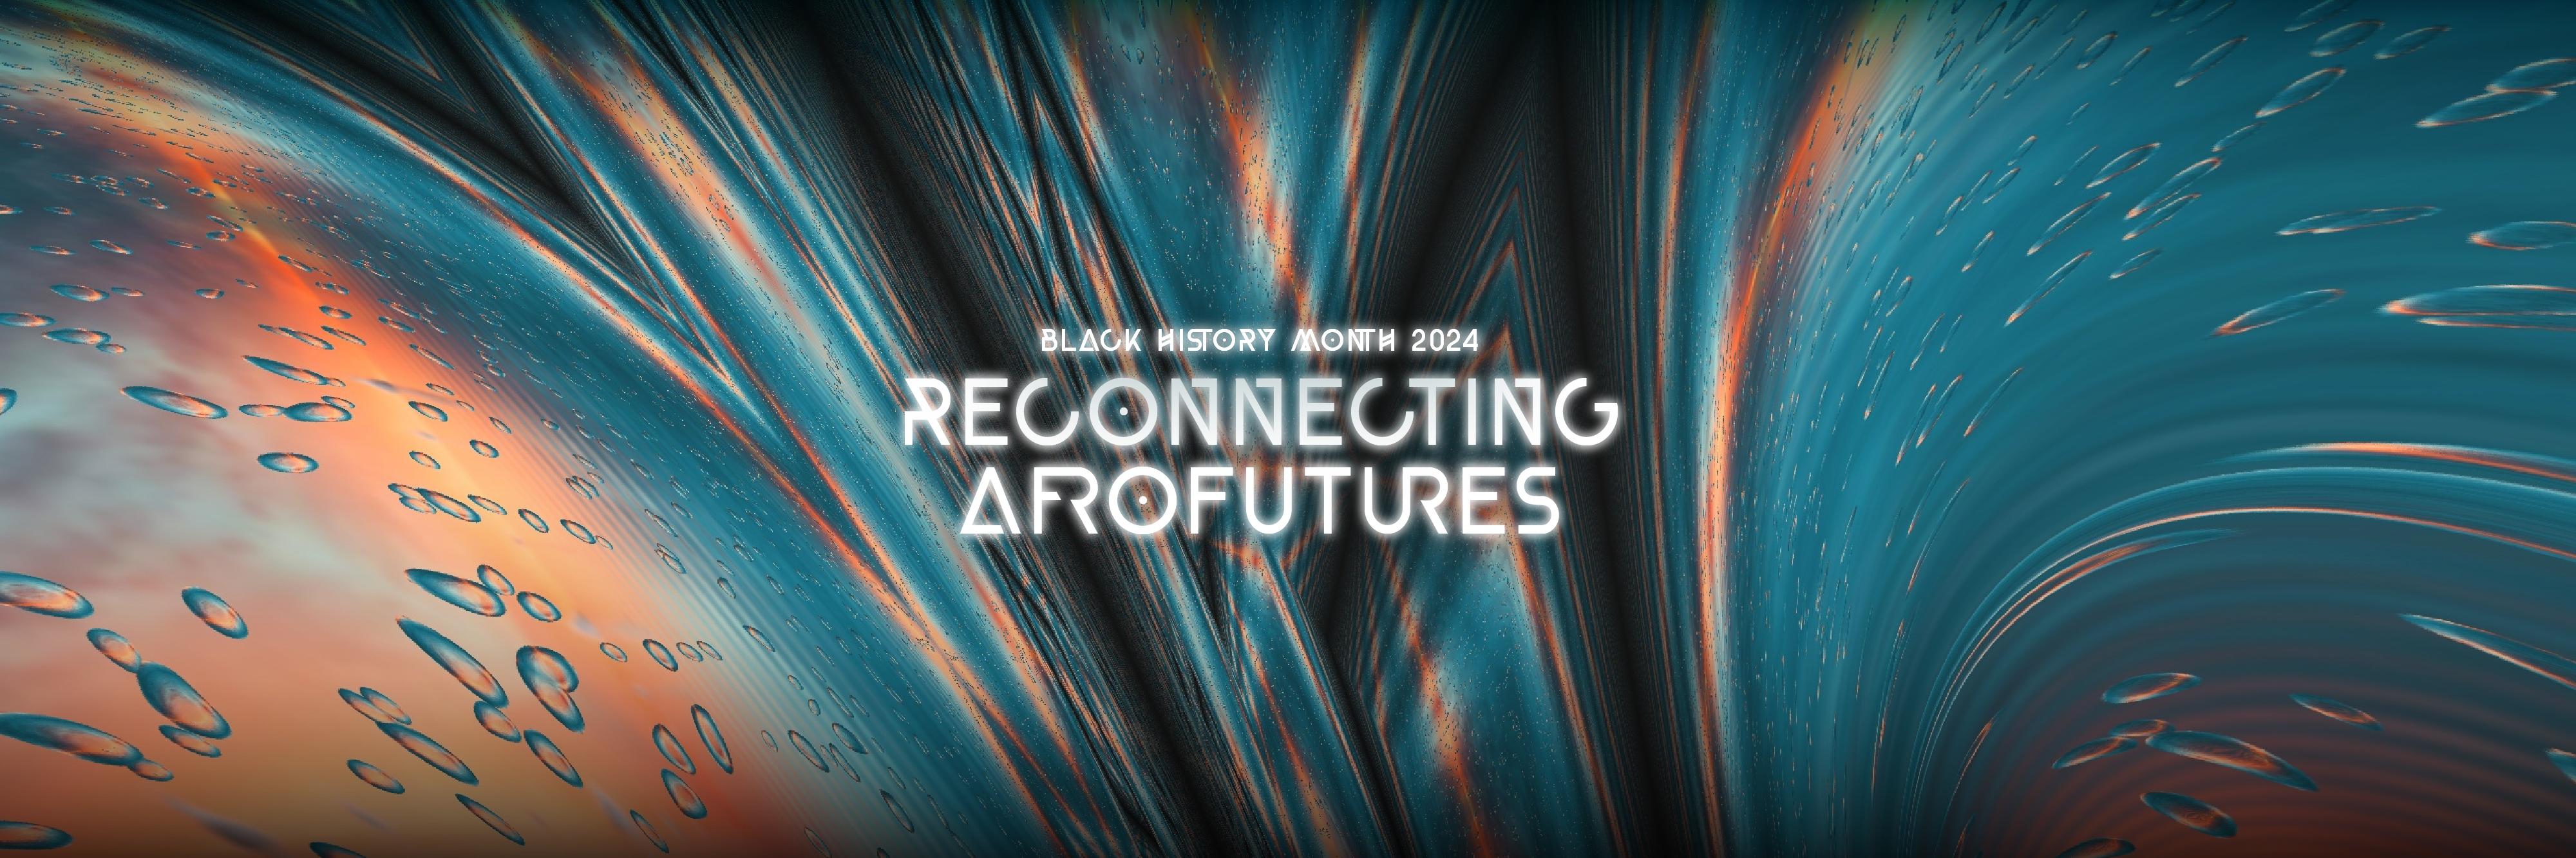 Black History Month 2024: Reconnecting Afrofutures